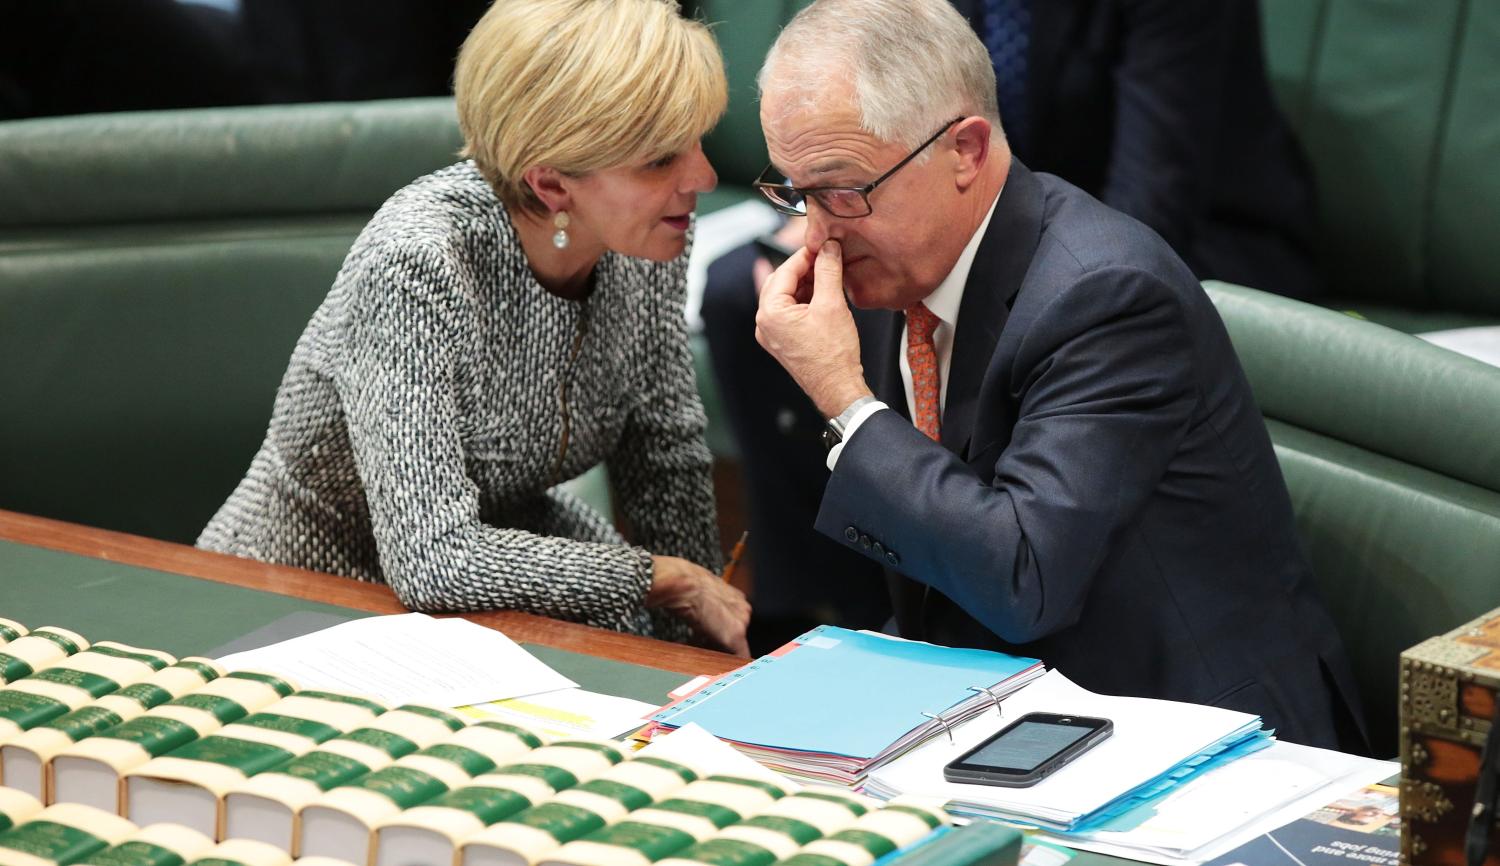 Foreign Minister Julie Bishop speaks with Prime Minister Malcolm Turnbull during question time, May 2017 (Photo: Getty Images/Stefan Postles)